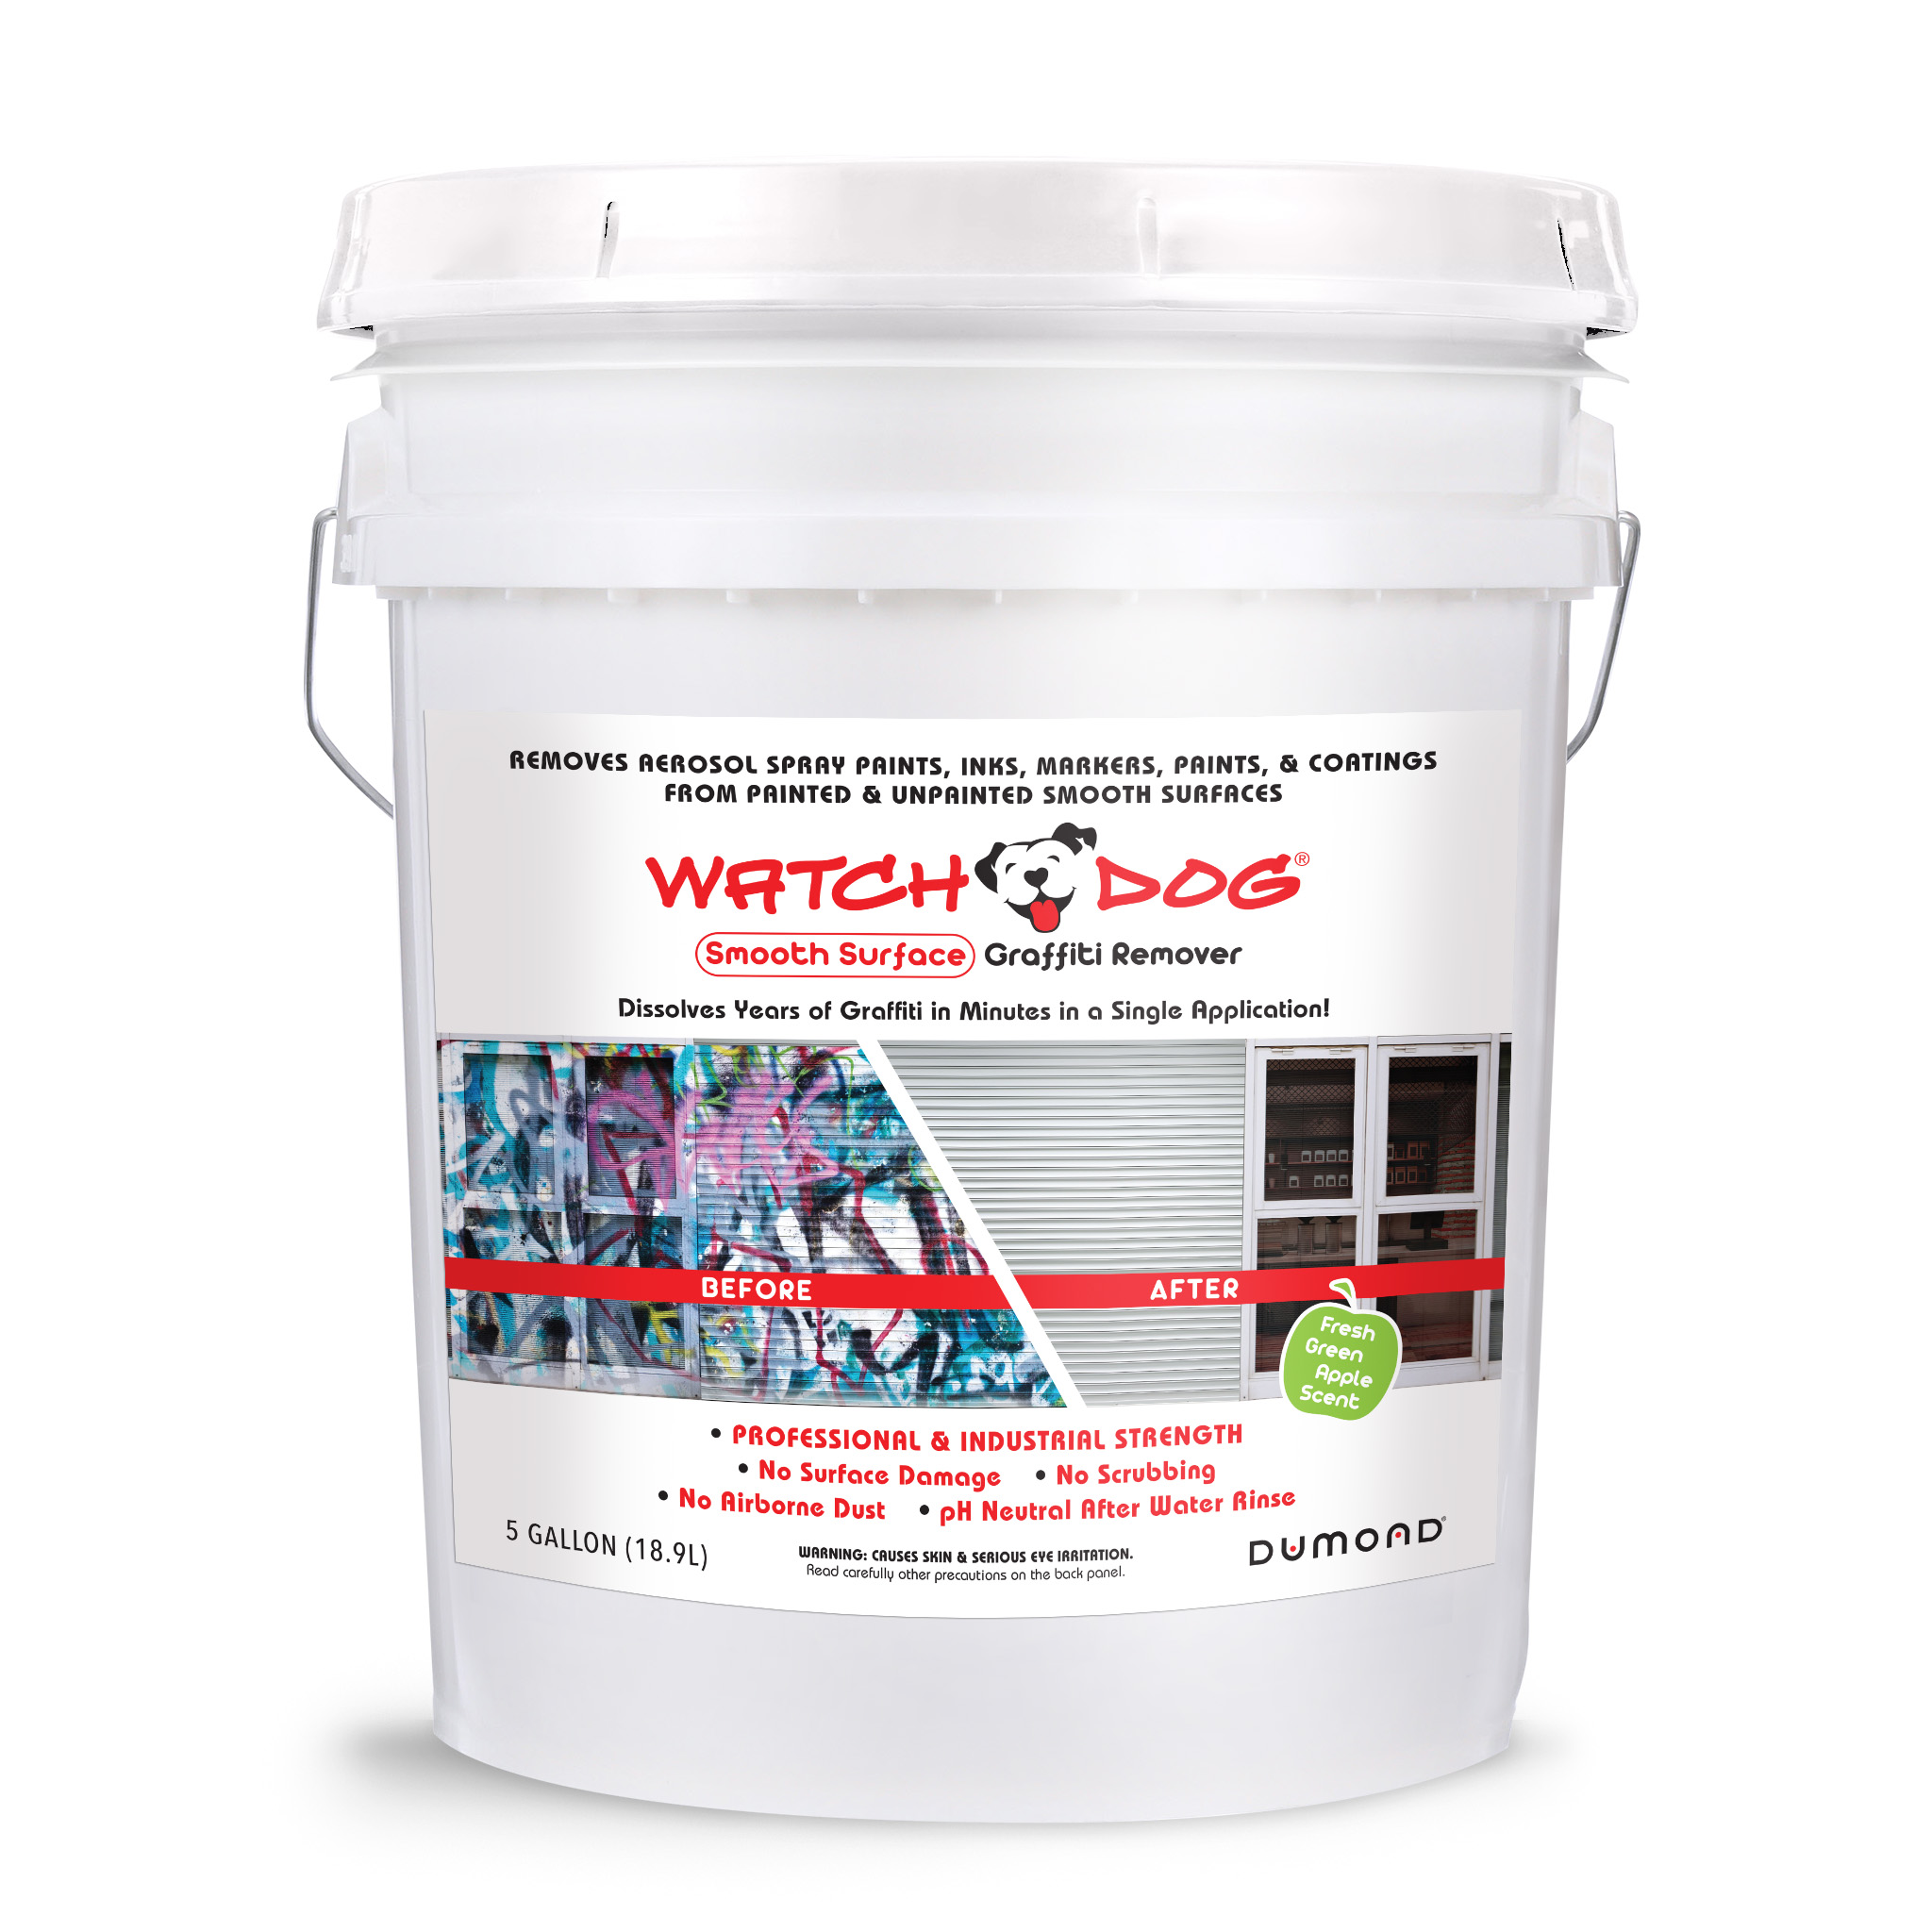 Dumond 8205 Watch Dog Lift Away Graffiti Remover, 5 Gallons - Click Image to Close